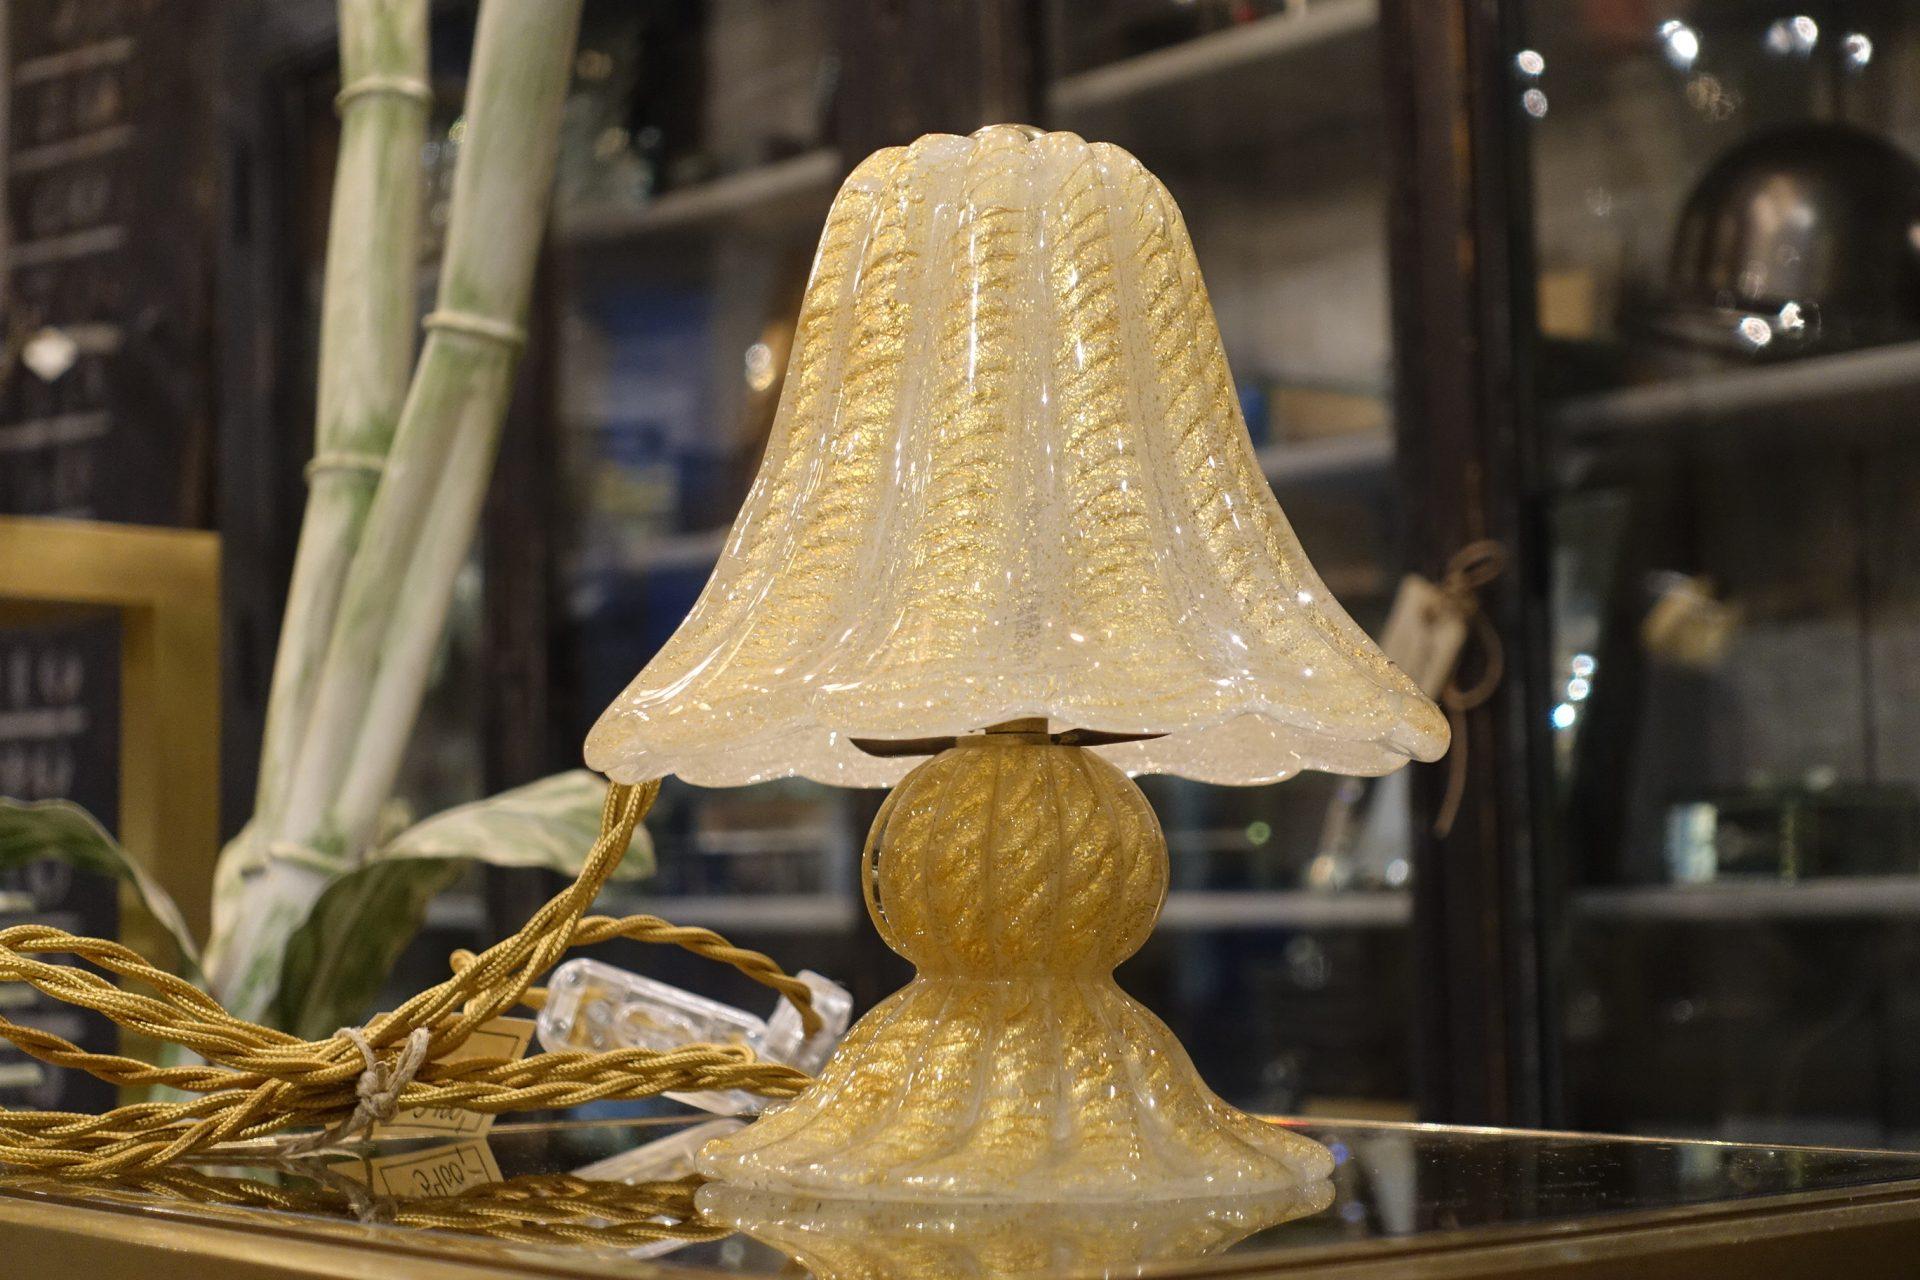 Stunning Murano opaque glass table lamps, 1970s, Italy. With a gold hue on both base and shade. Brass cup on top. Professionally re-wired, with a switch on the twisted golden cord.

We currently have two in stock

Priced per piece.